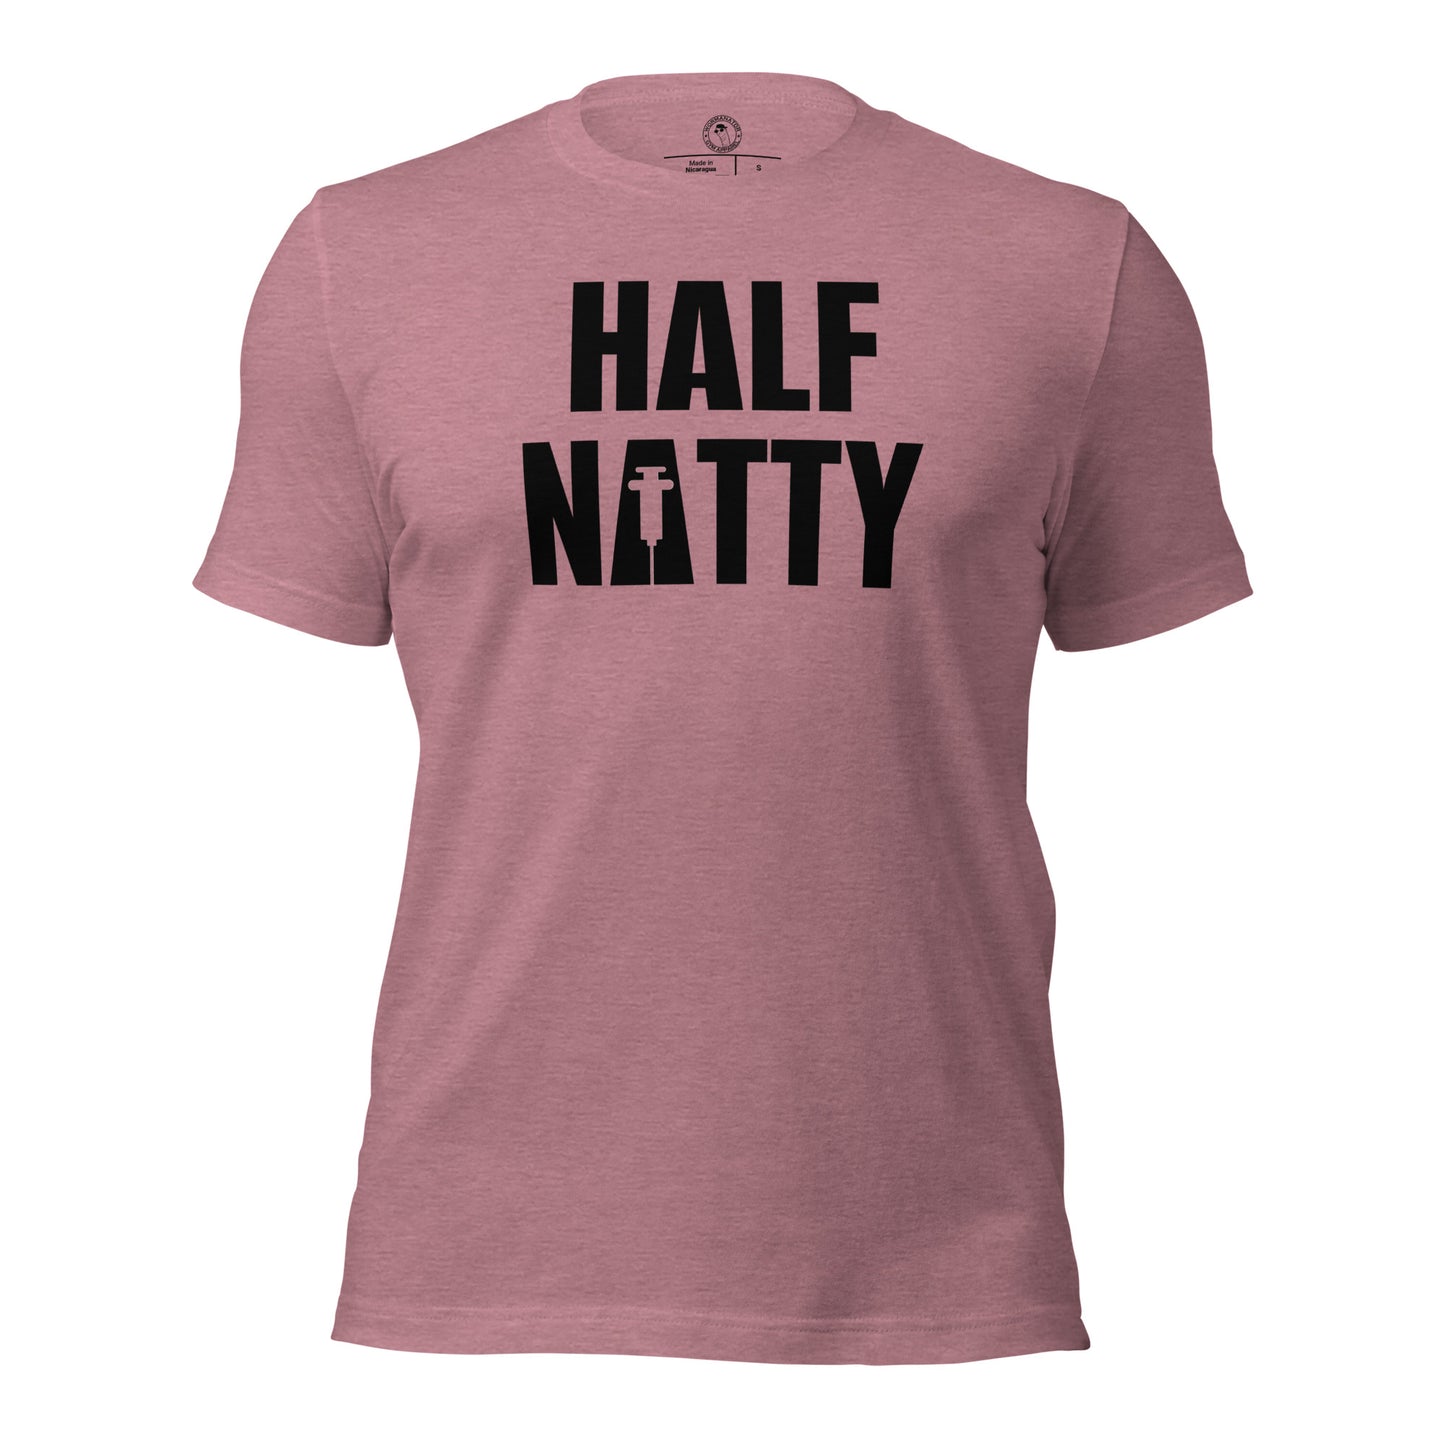 Half Natty T-Shirt in Heather Orchid